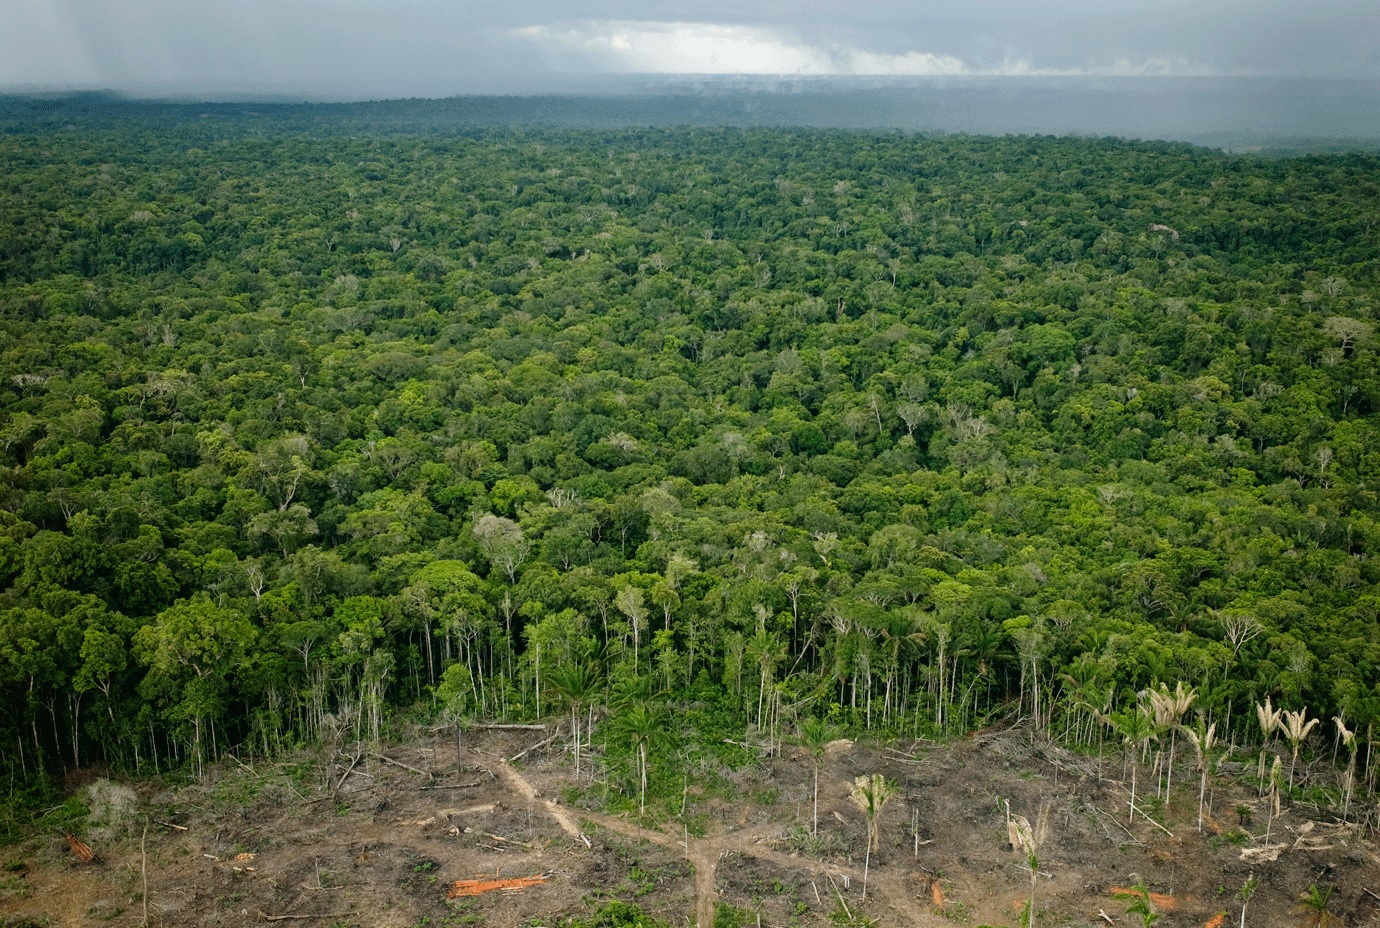 The increase in deforestation and fires in the Amazon, combined with the high concentration of greenhouse gases, is turning the atmosphere over the rainforest drier.